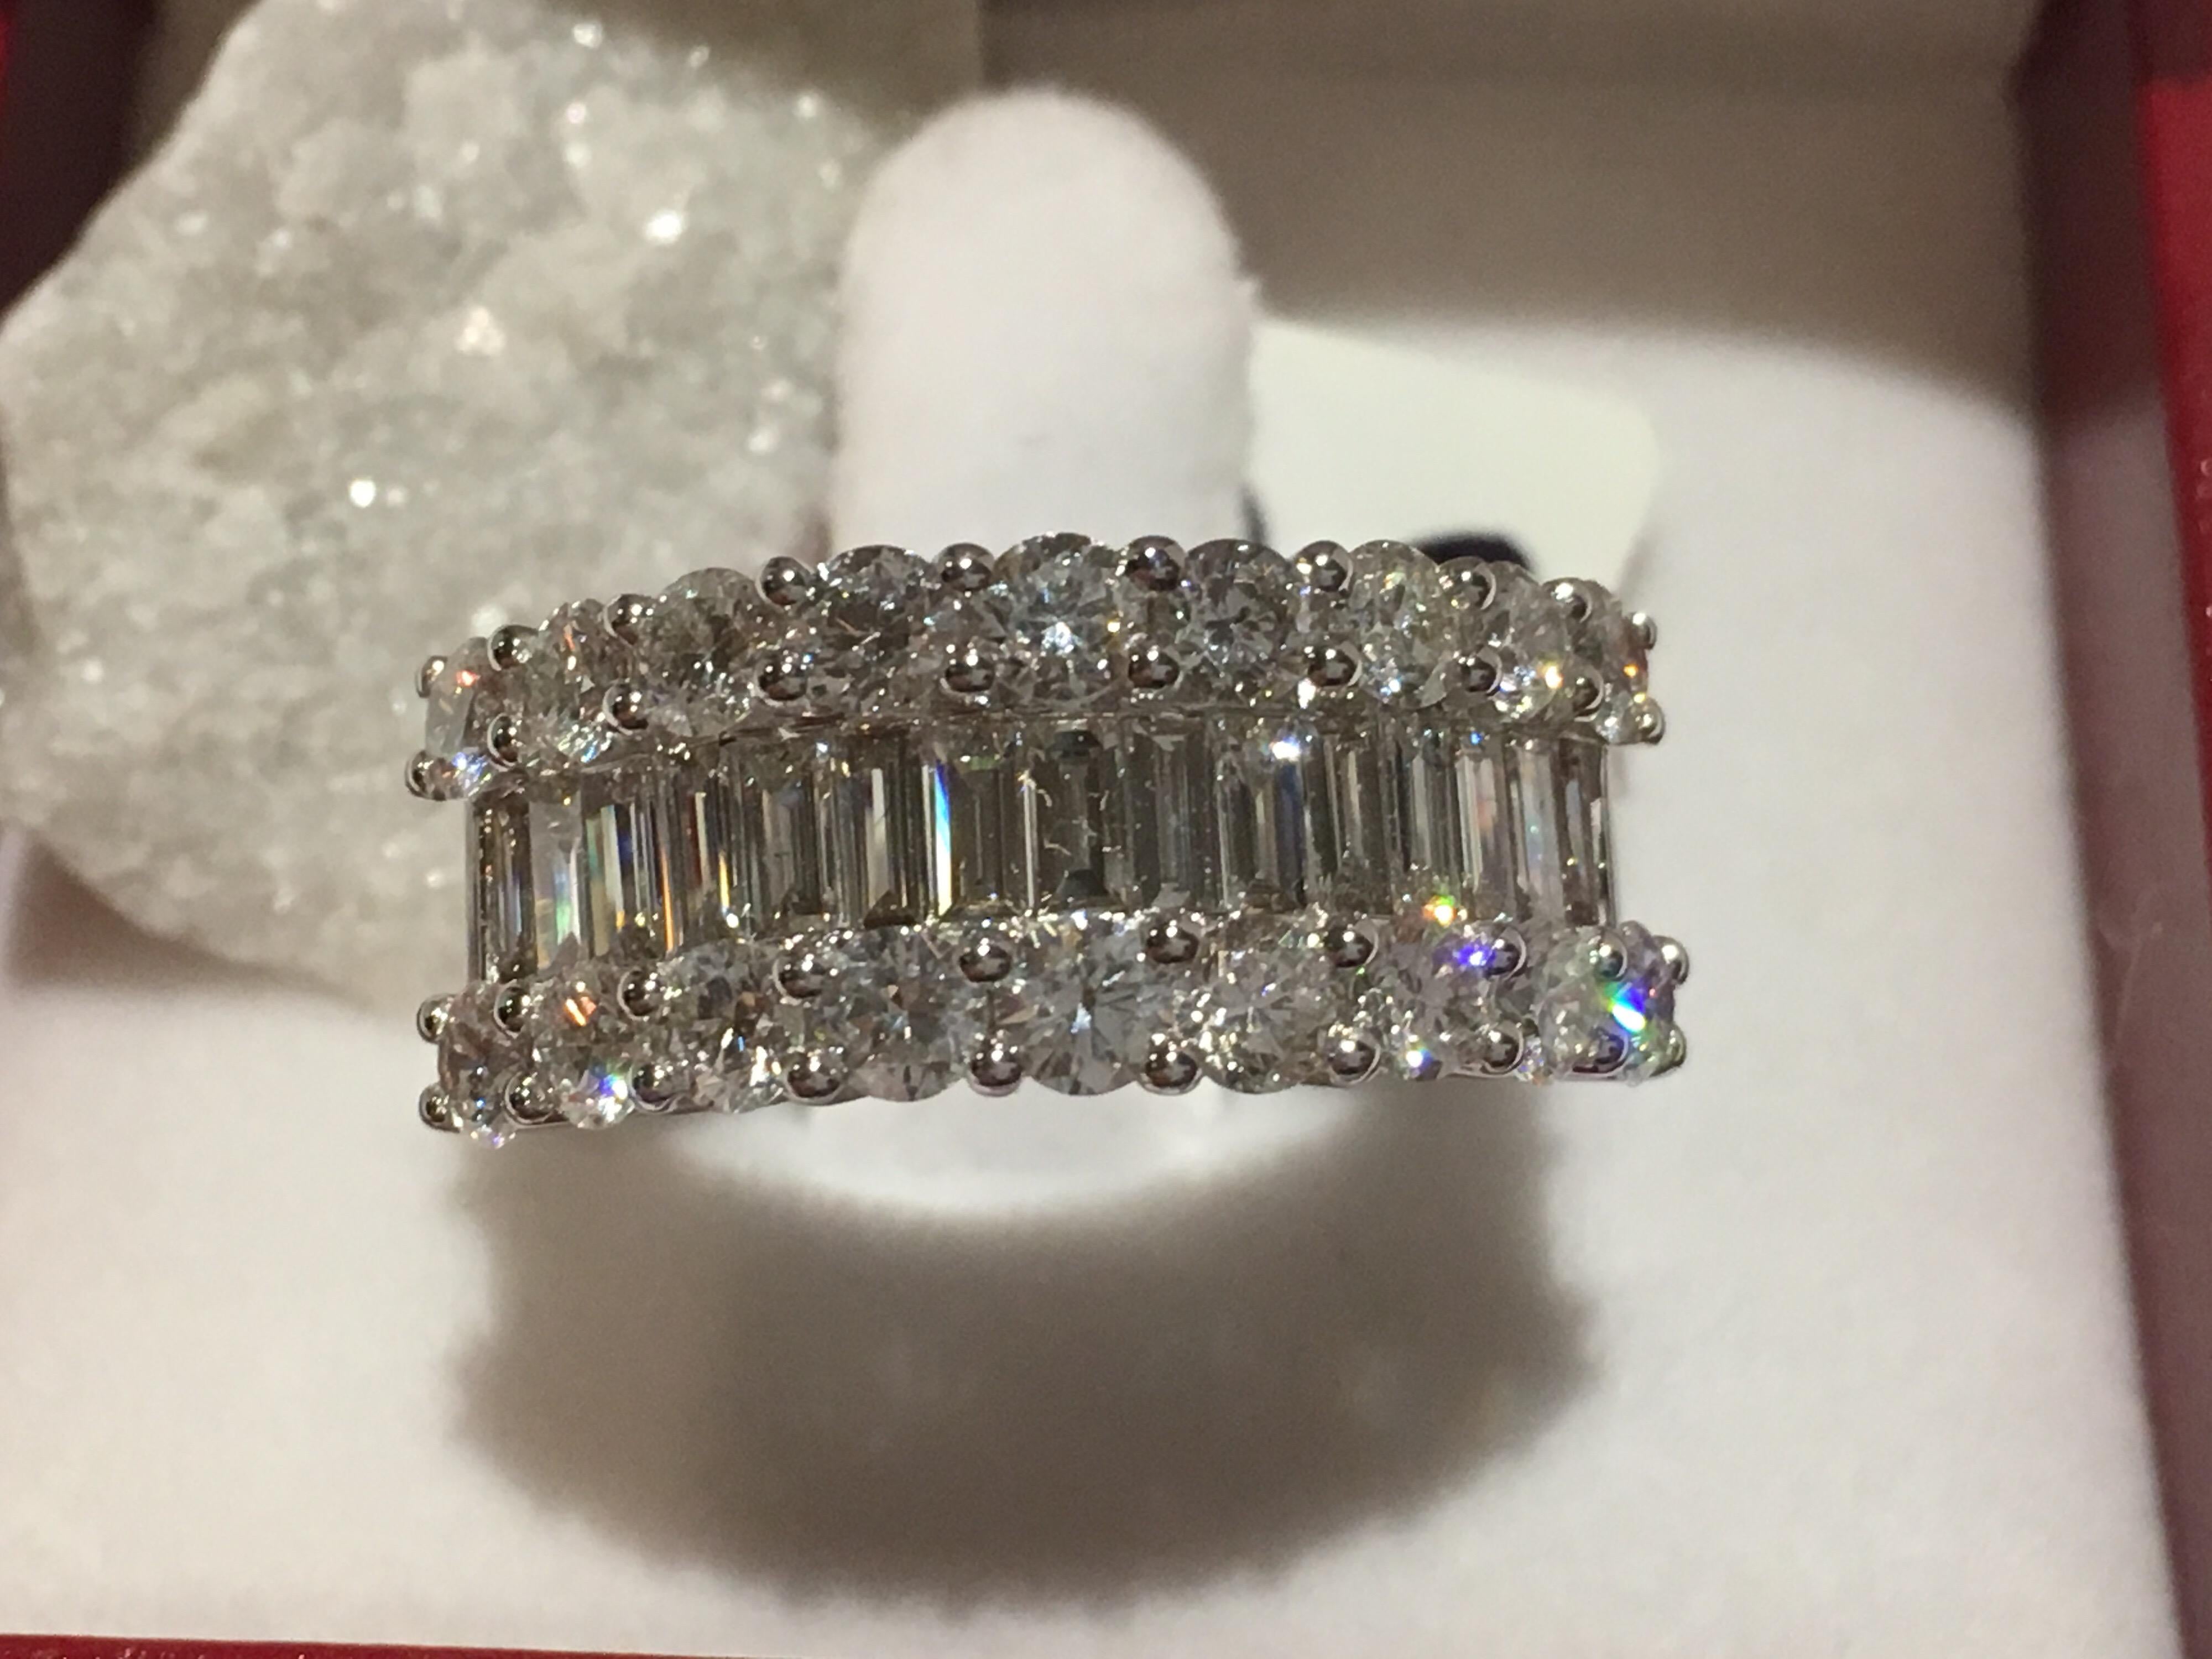 White Diamonds Baguette and Round  set in 18K white Gold, 8.20 Gram total weight.
Total Diamonds 2.10 Carat. 
Baguette size is 8.5 MM.
All Diamonds are matched  and VS quality with D/E color.
The Ring is 6.5 but can be resized.